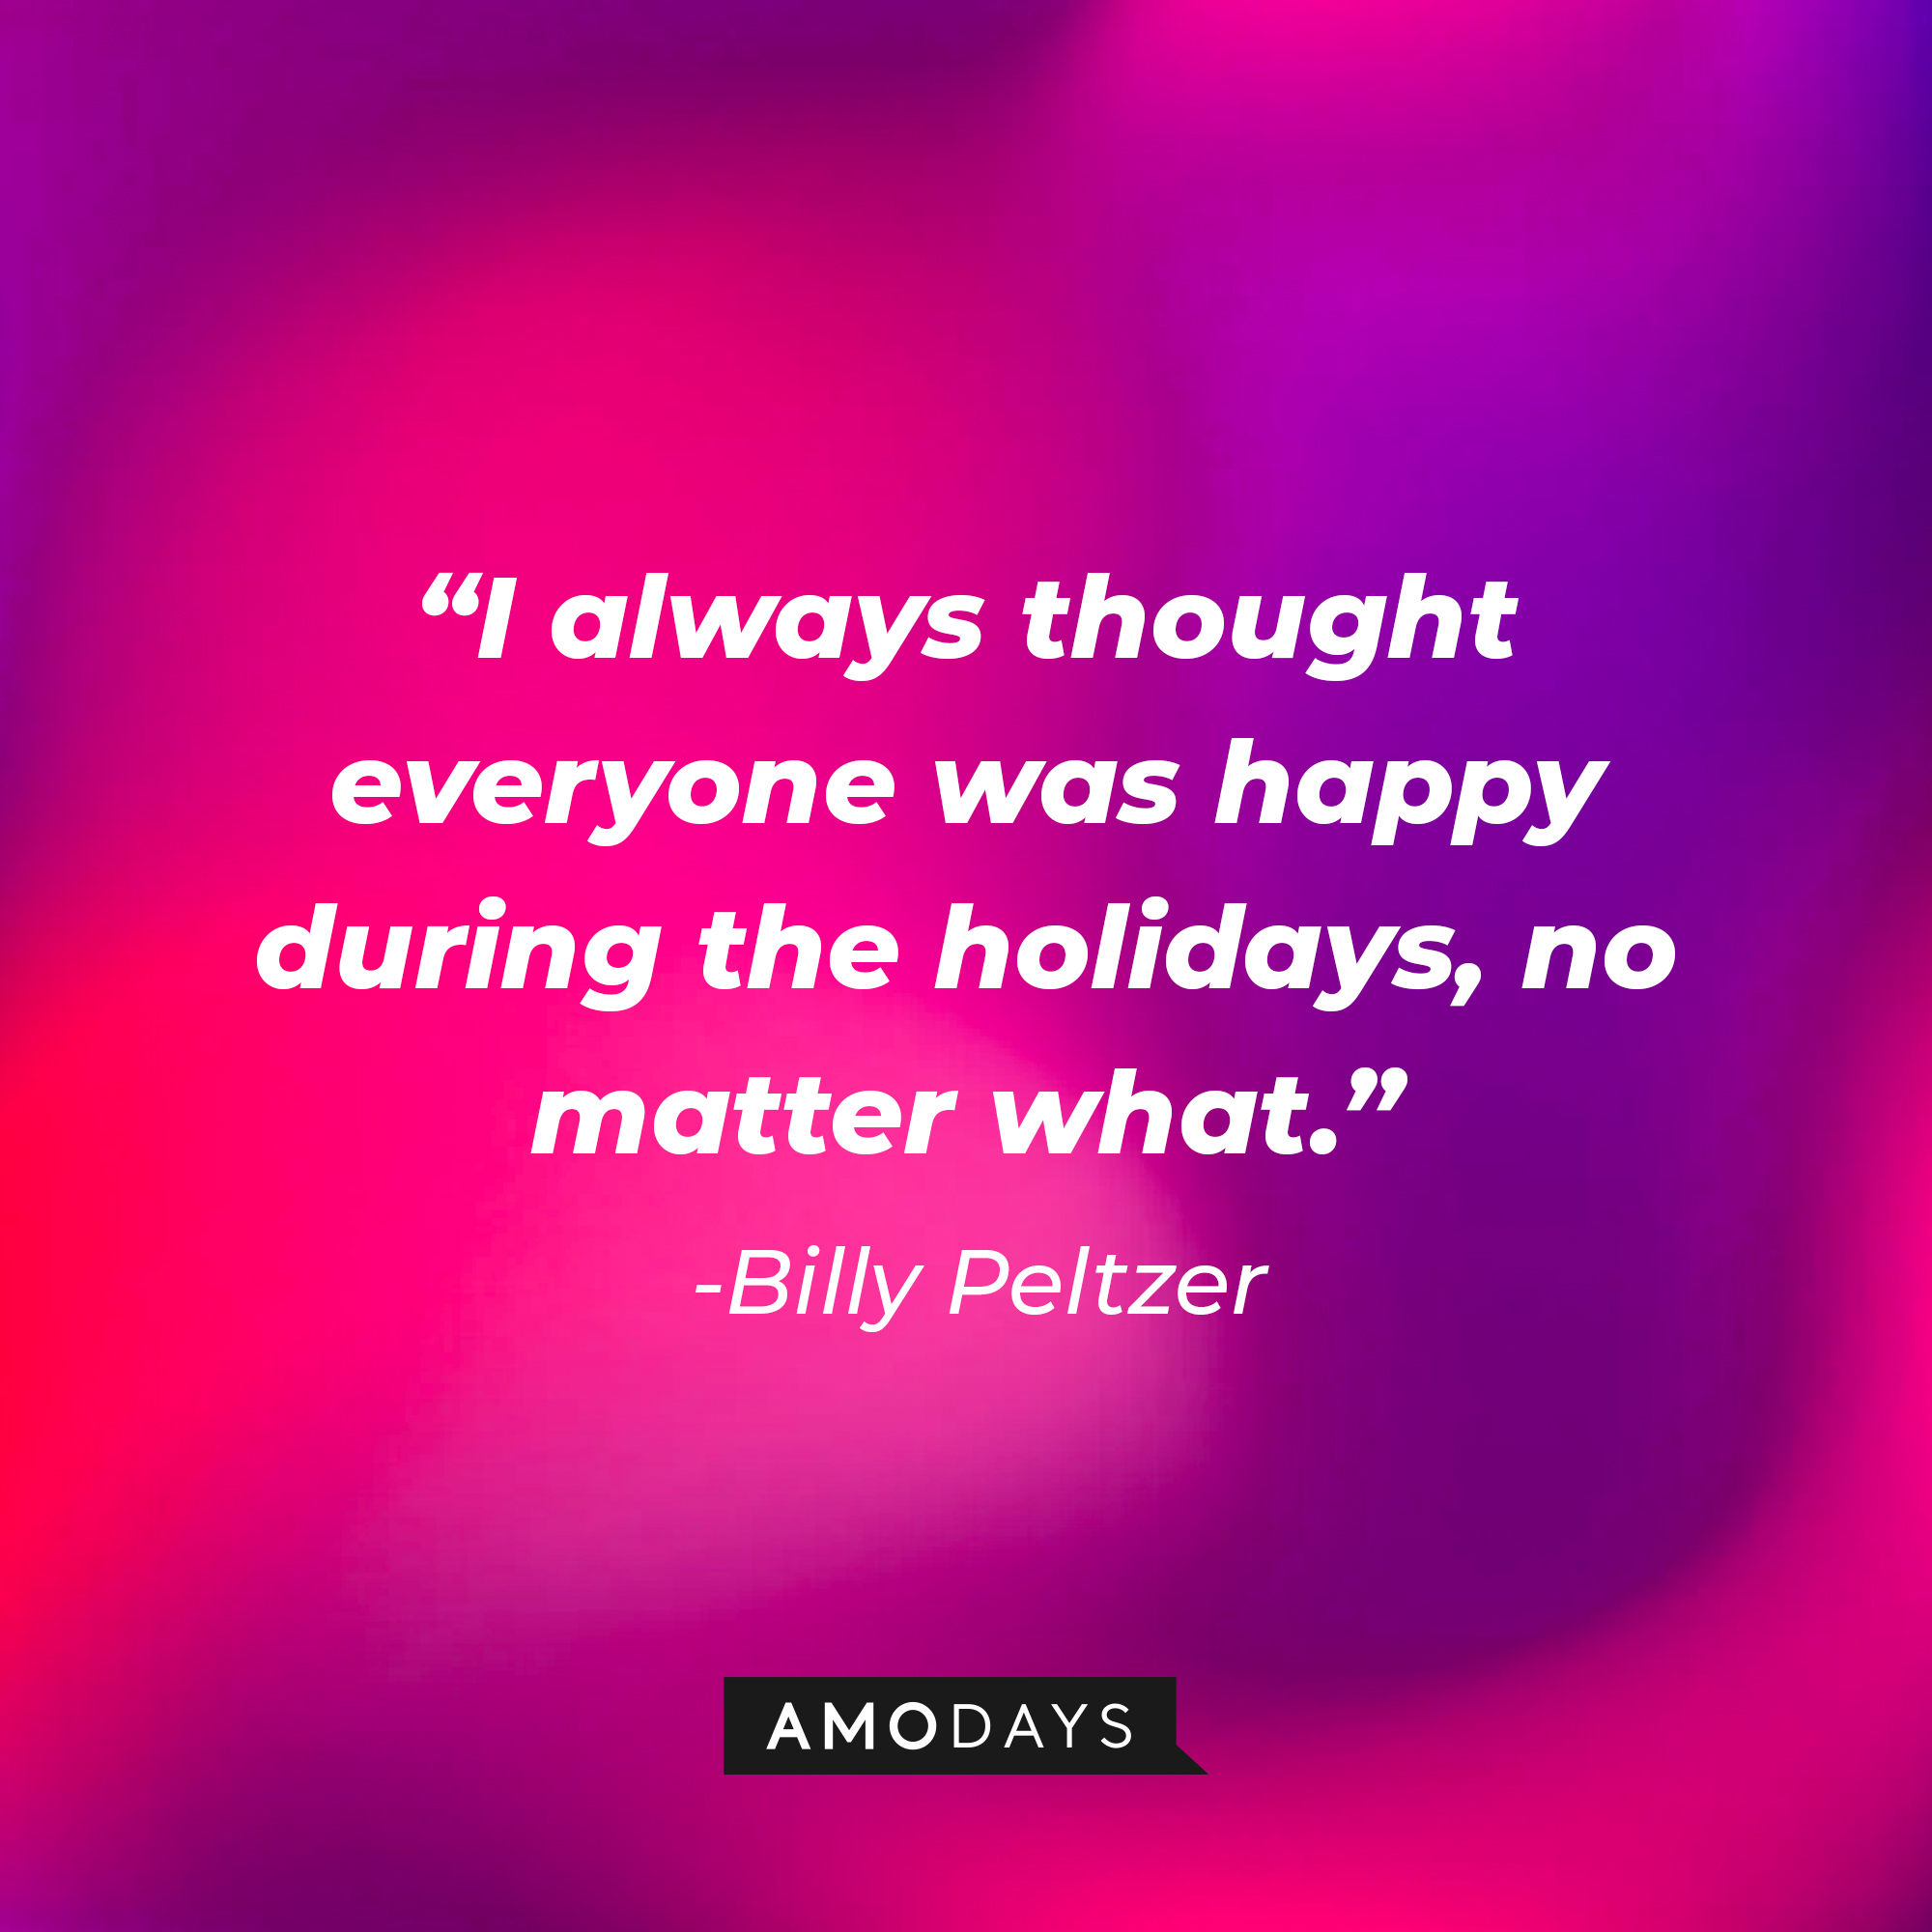 Billy Peltzer's quote: "I always thought everyone was happy during the holidays, no matter what." | Source: AmoDays